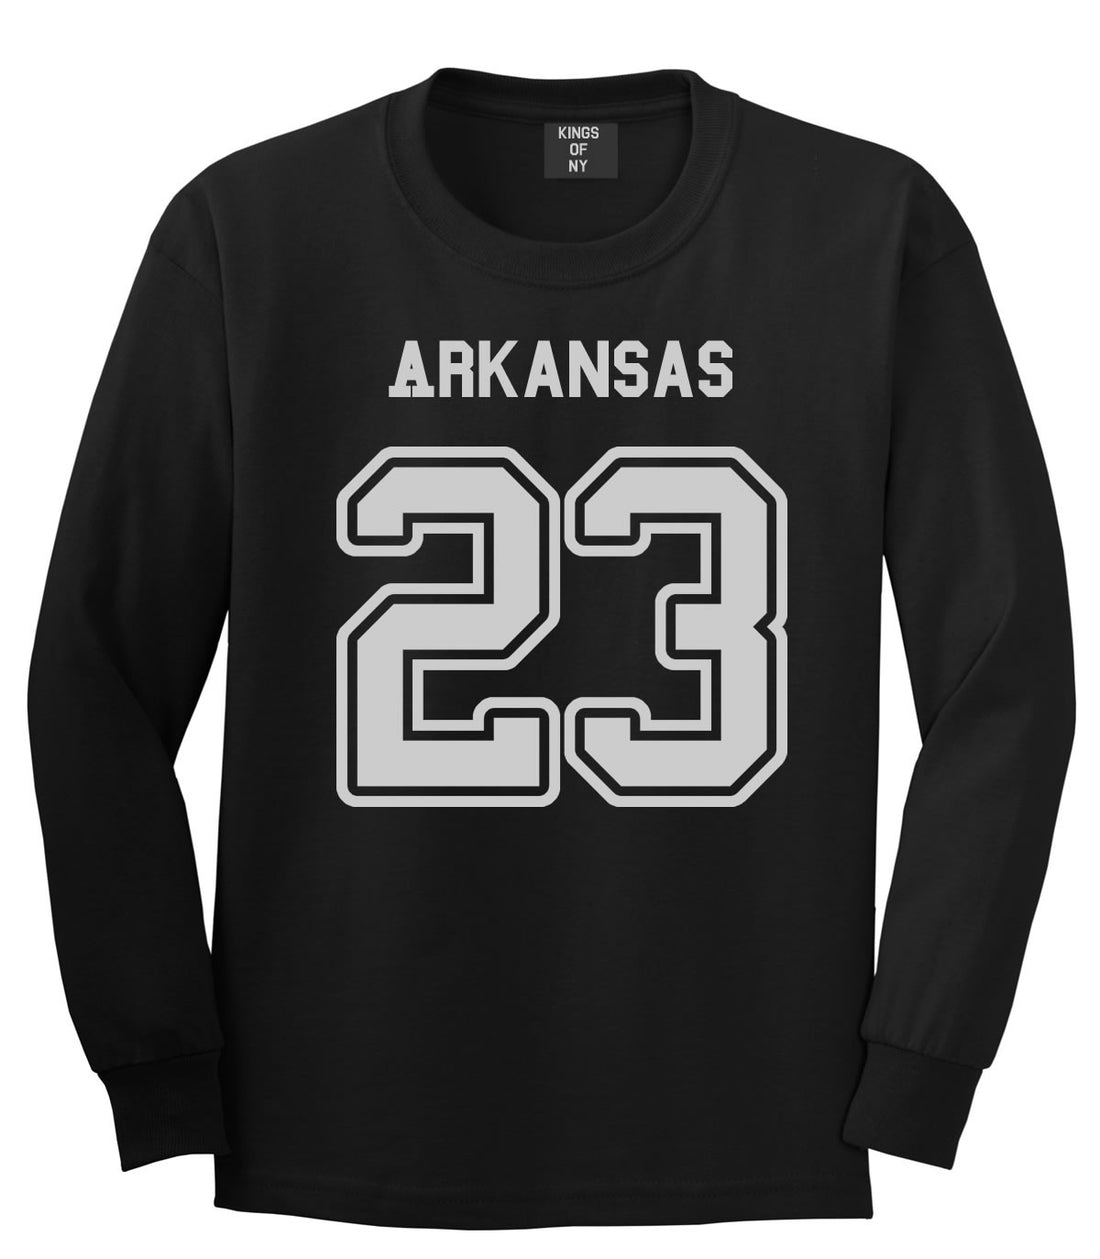 Sport Style Arkansas 23 Team State Jersey Long Sleeve T-Shirt By Kings Of NY